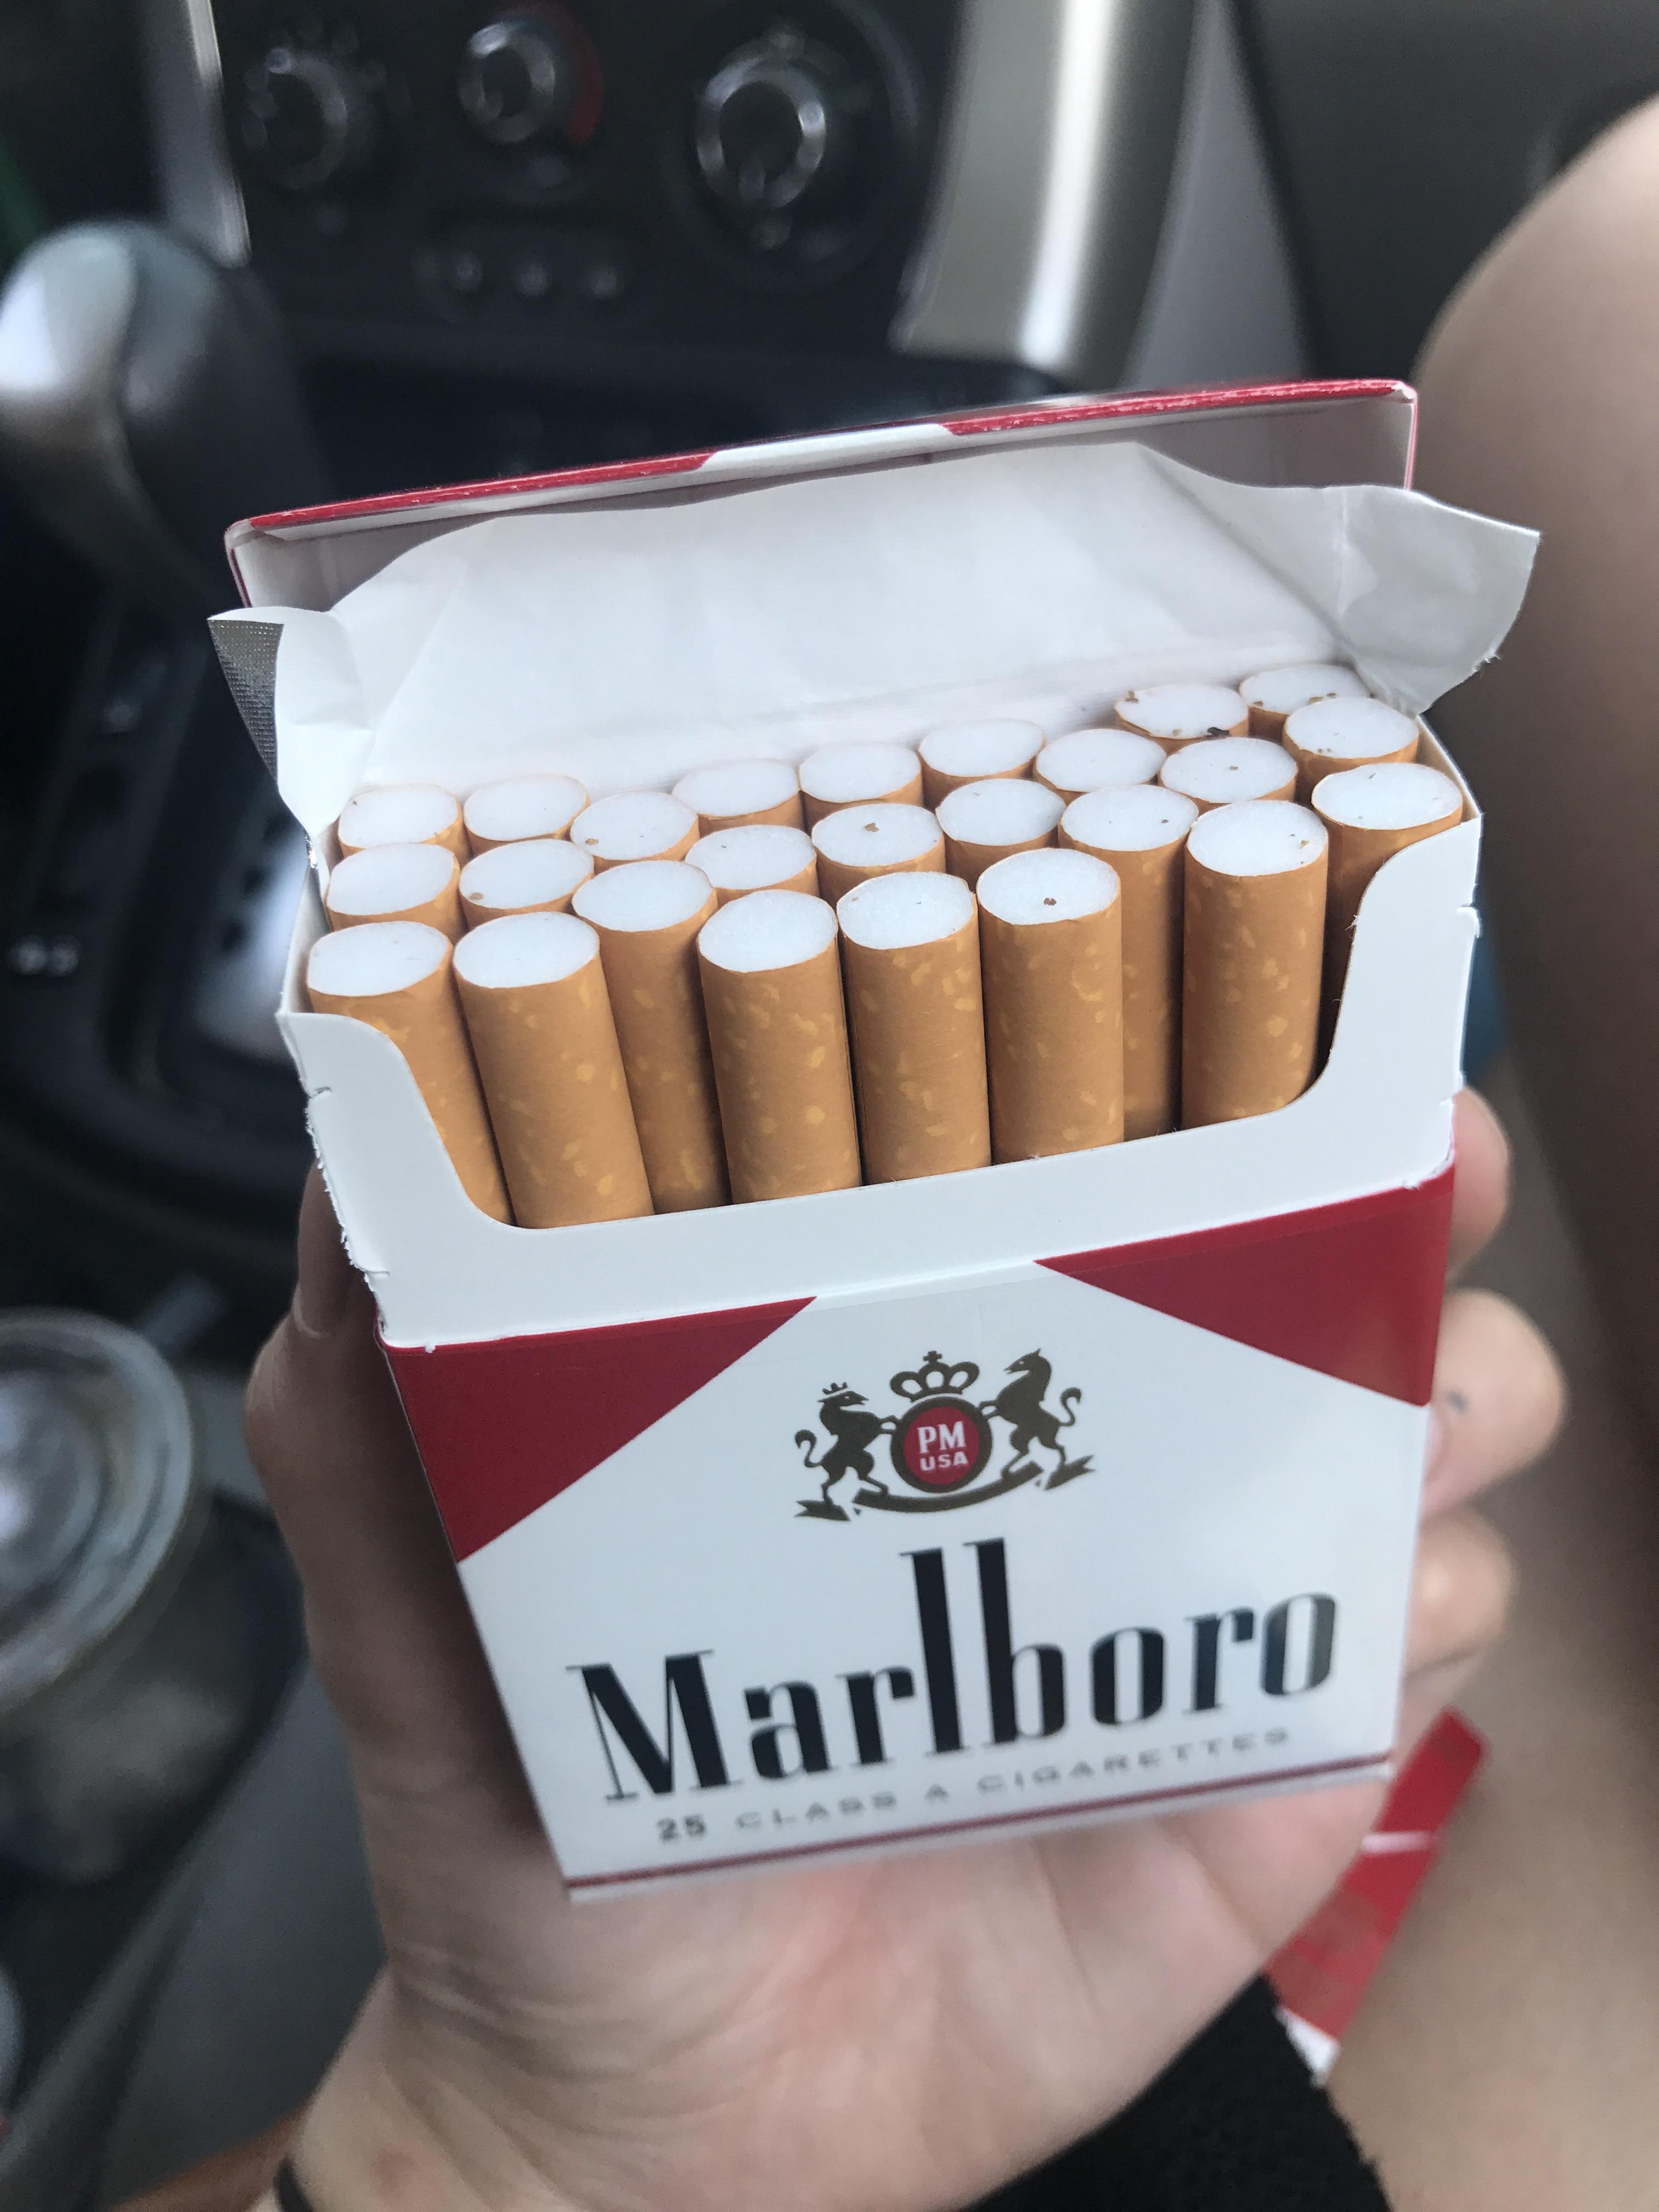 accidentally bought my first pack of reds with 25 cigarettes : r/Cigarettes